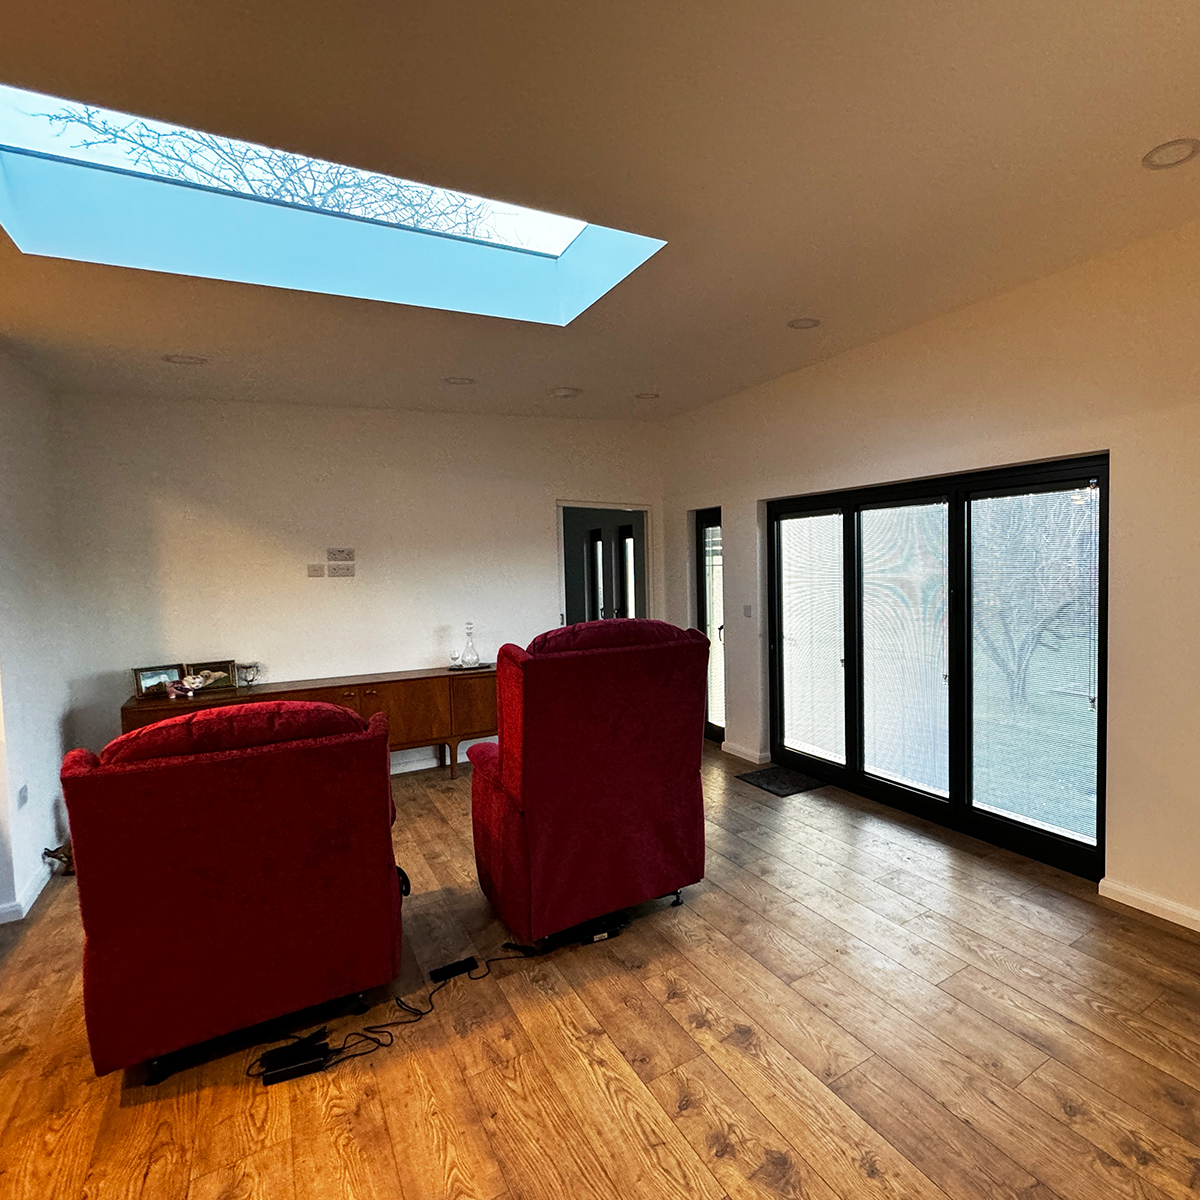 Interior of lounge area with skylight inside mobile home